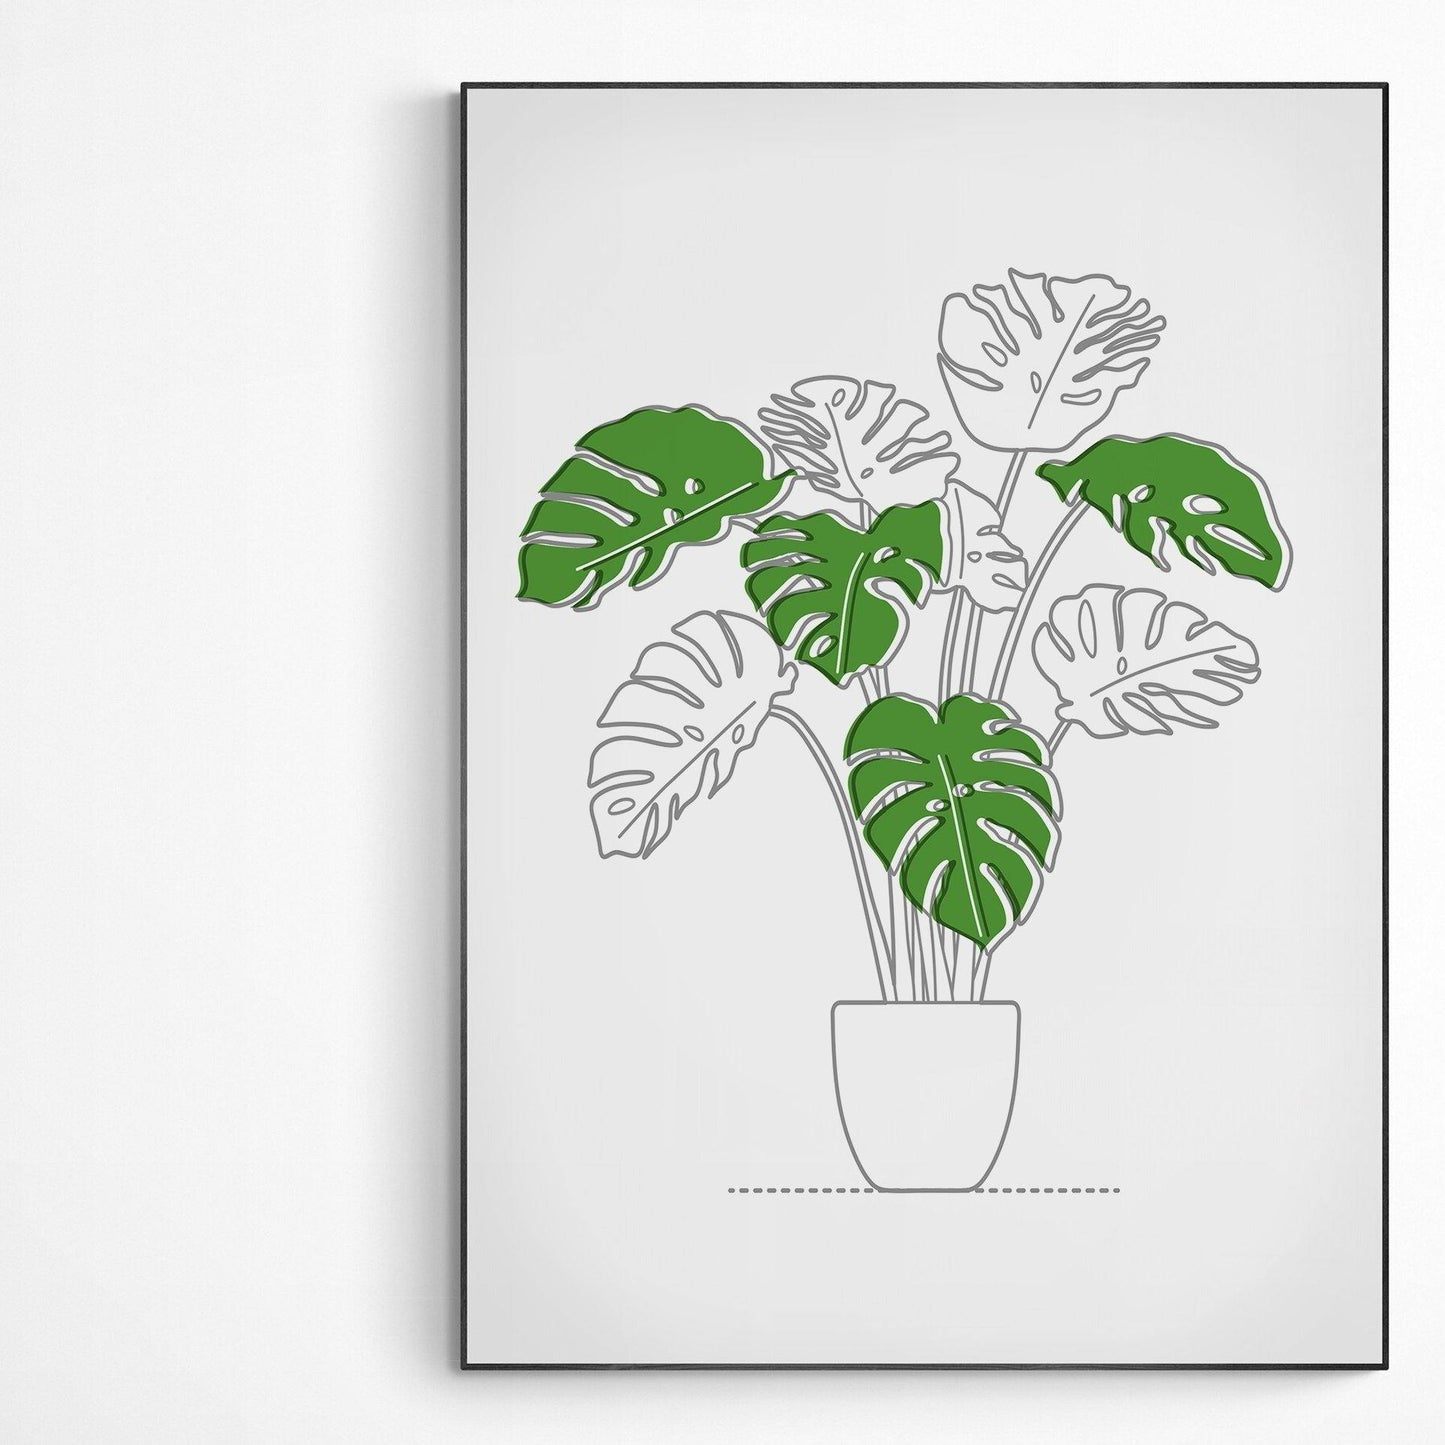 Mosquera Plant Poster | Original Print Art | Motivational Poster Wall Art Decor | Greeting Card Gifts | Variety Sizes